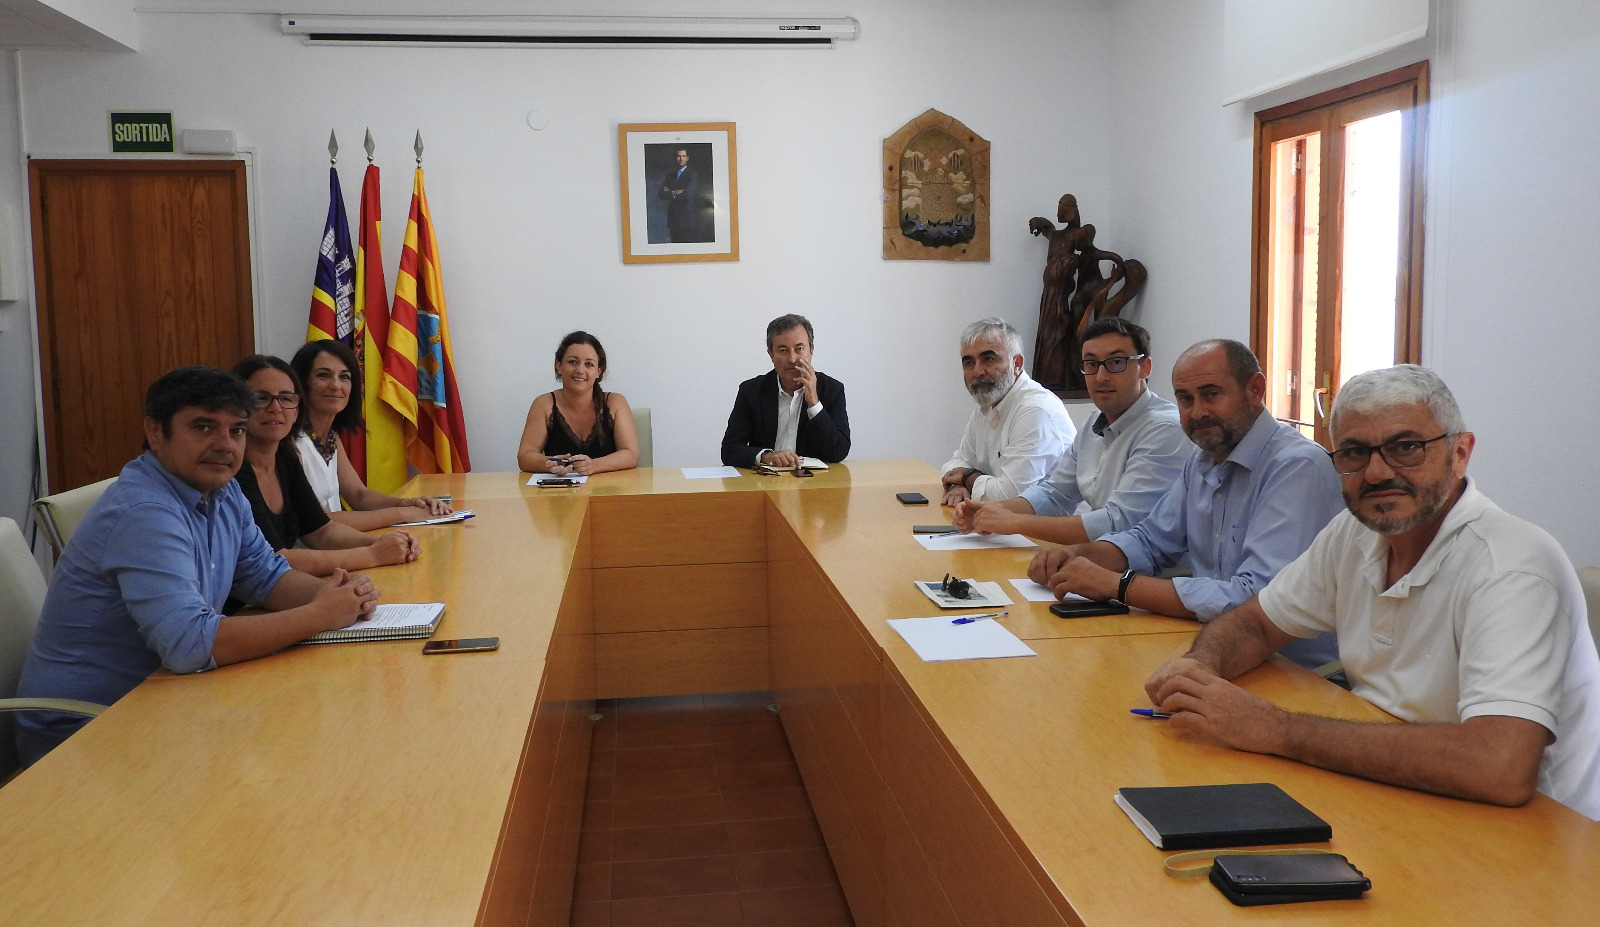 THE PRESIDENT OF THE APB, JOAN GUAL DE TORRELLA, FORMALLY MEETS WITH THE NEW PRESIDENT OF FORMENTERA ISLAND COUNCIL, ALEJANDRA FERRER